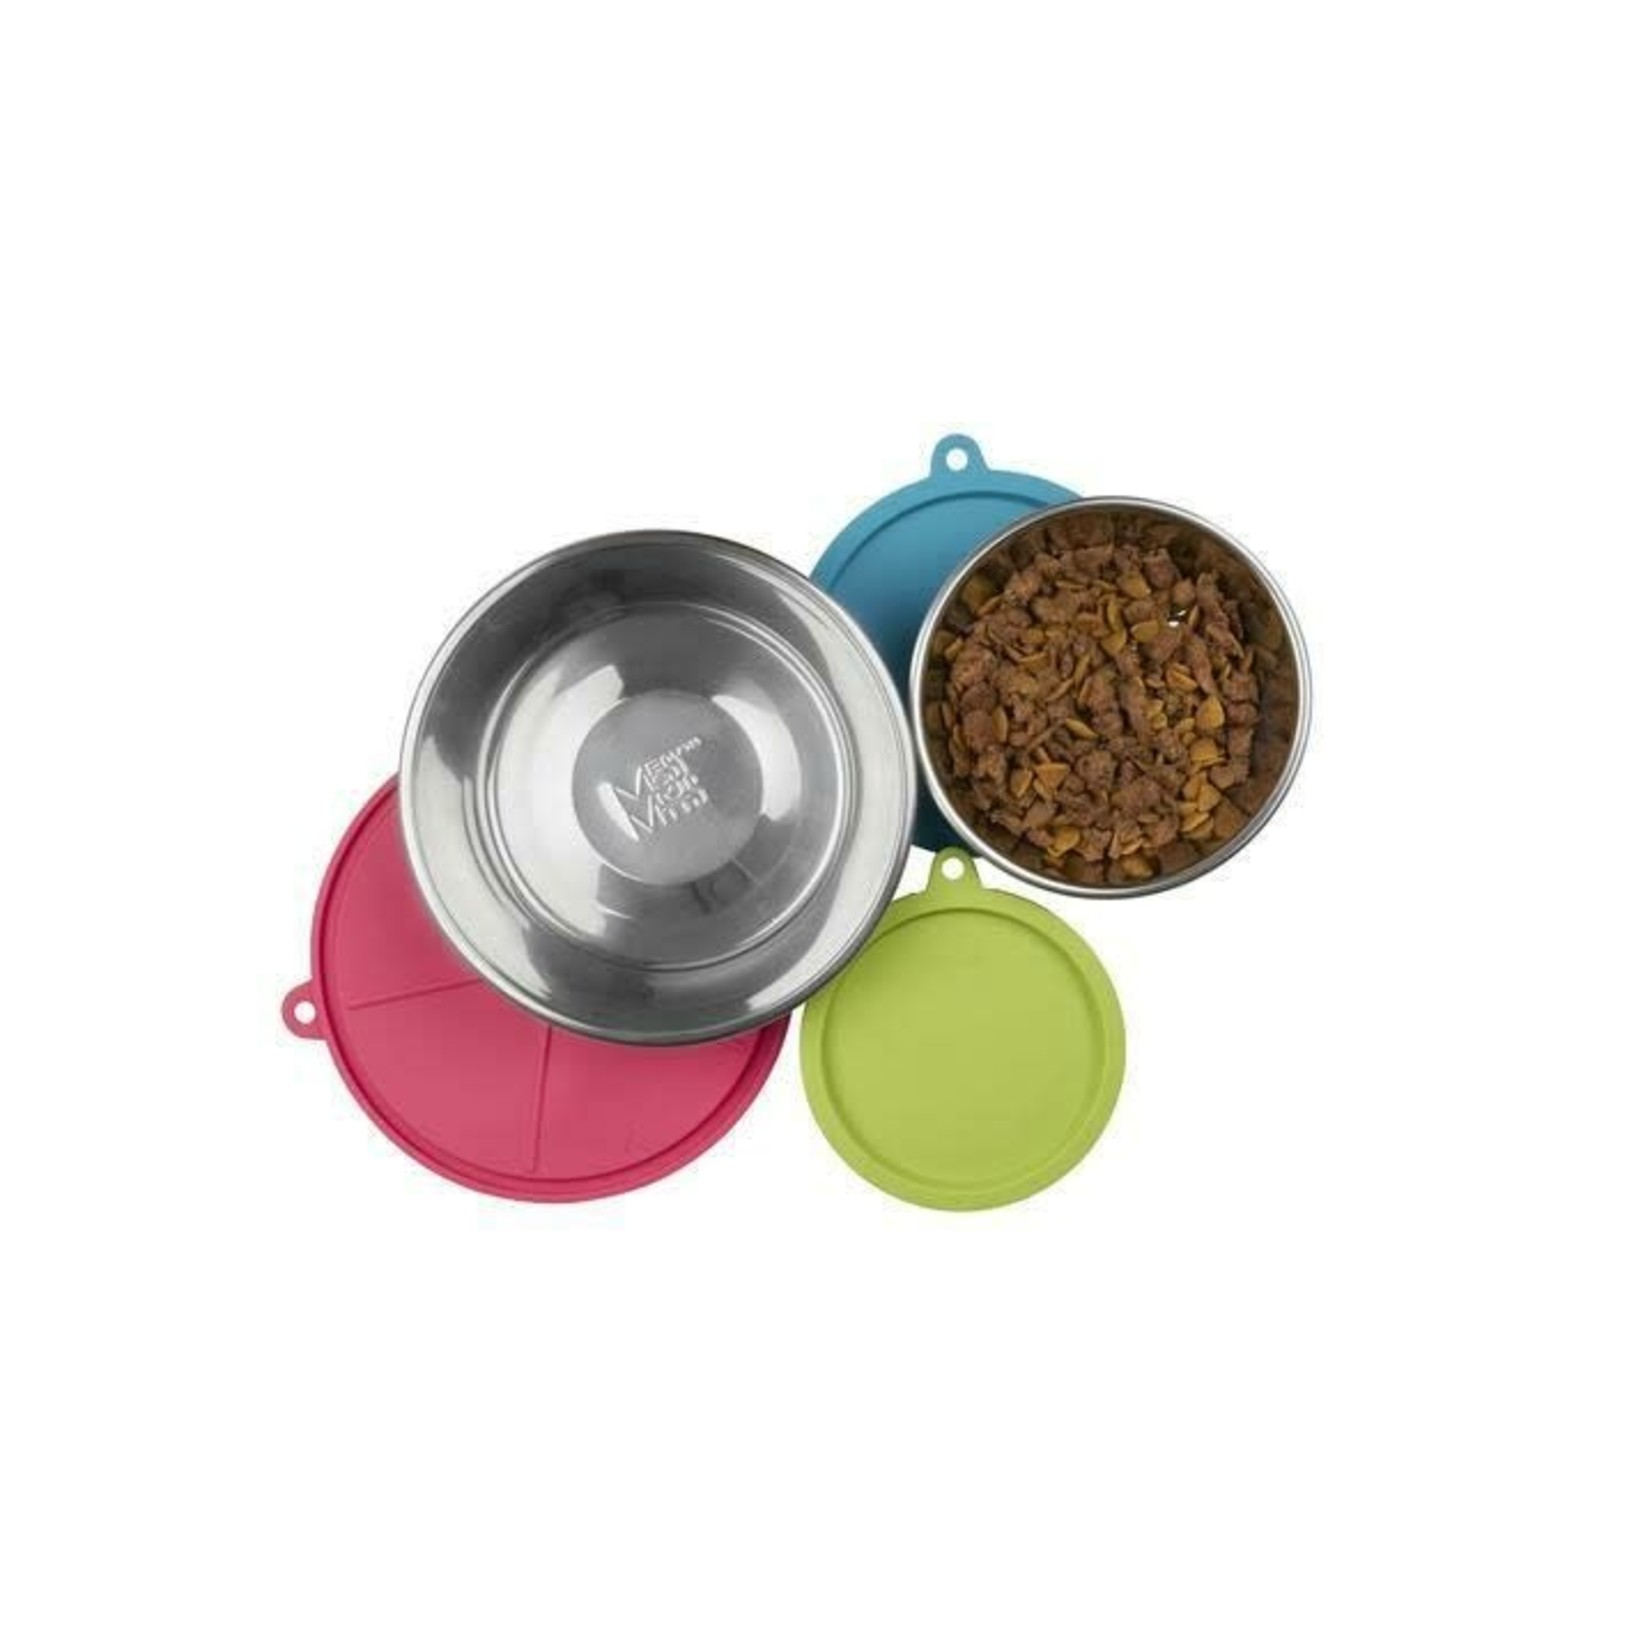 Messy Mutts Messy Mutts: Stainless Saucer with Silicone Lids: 6pc Set